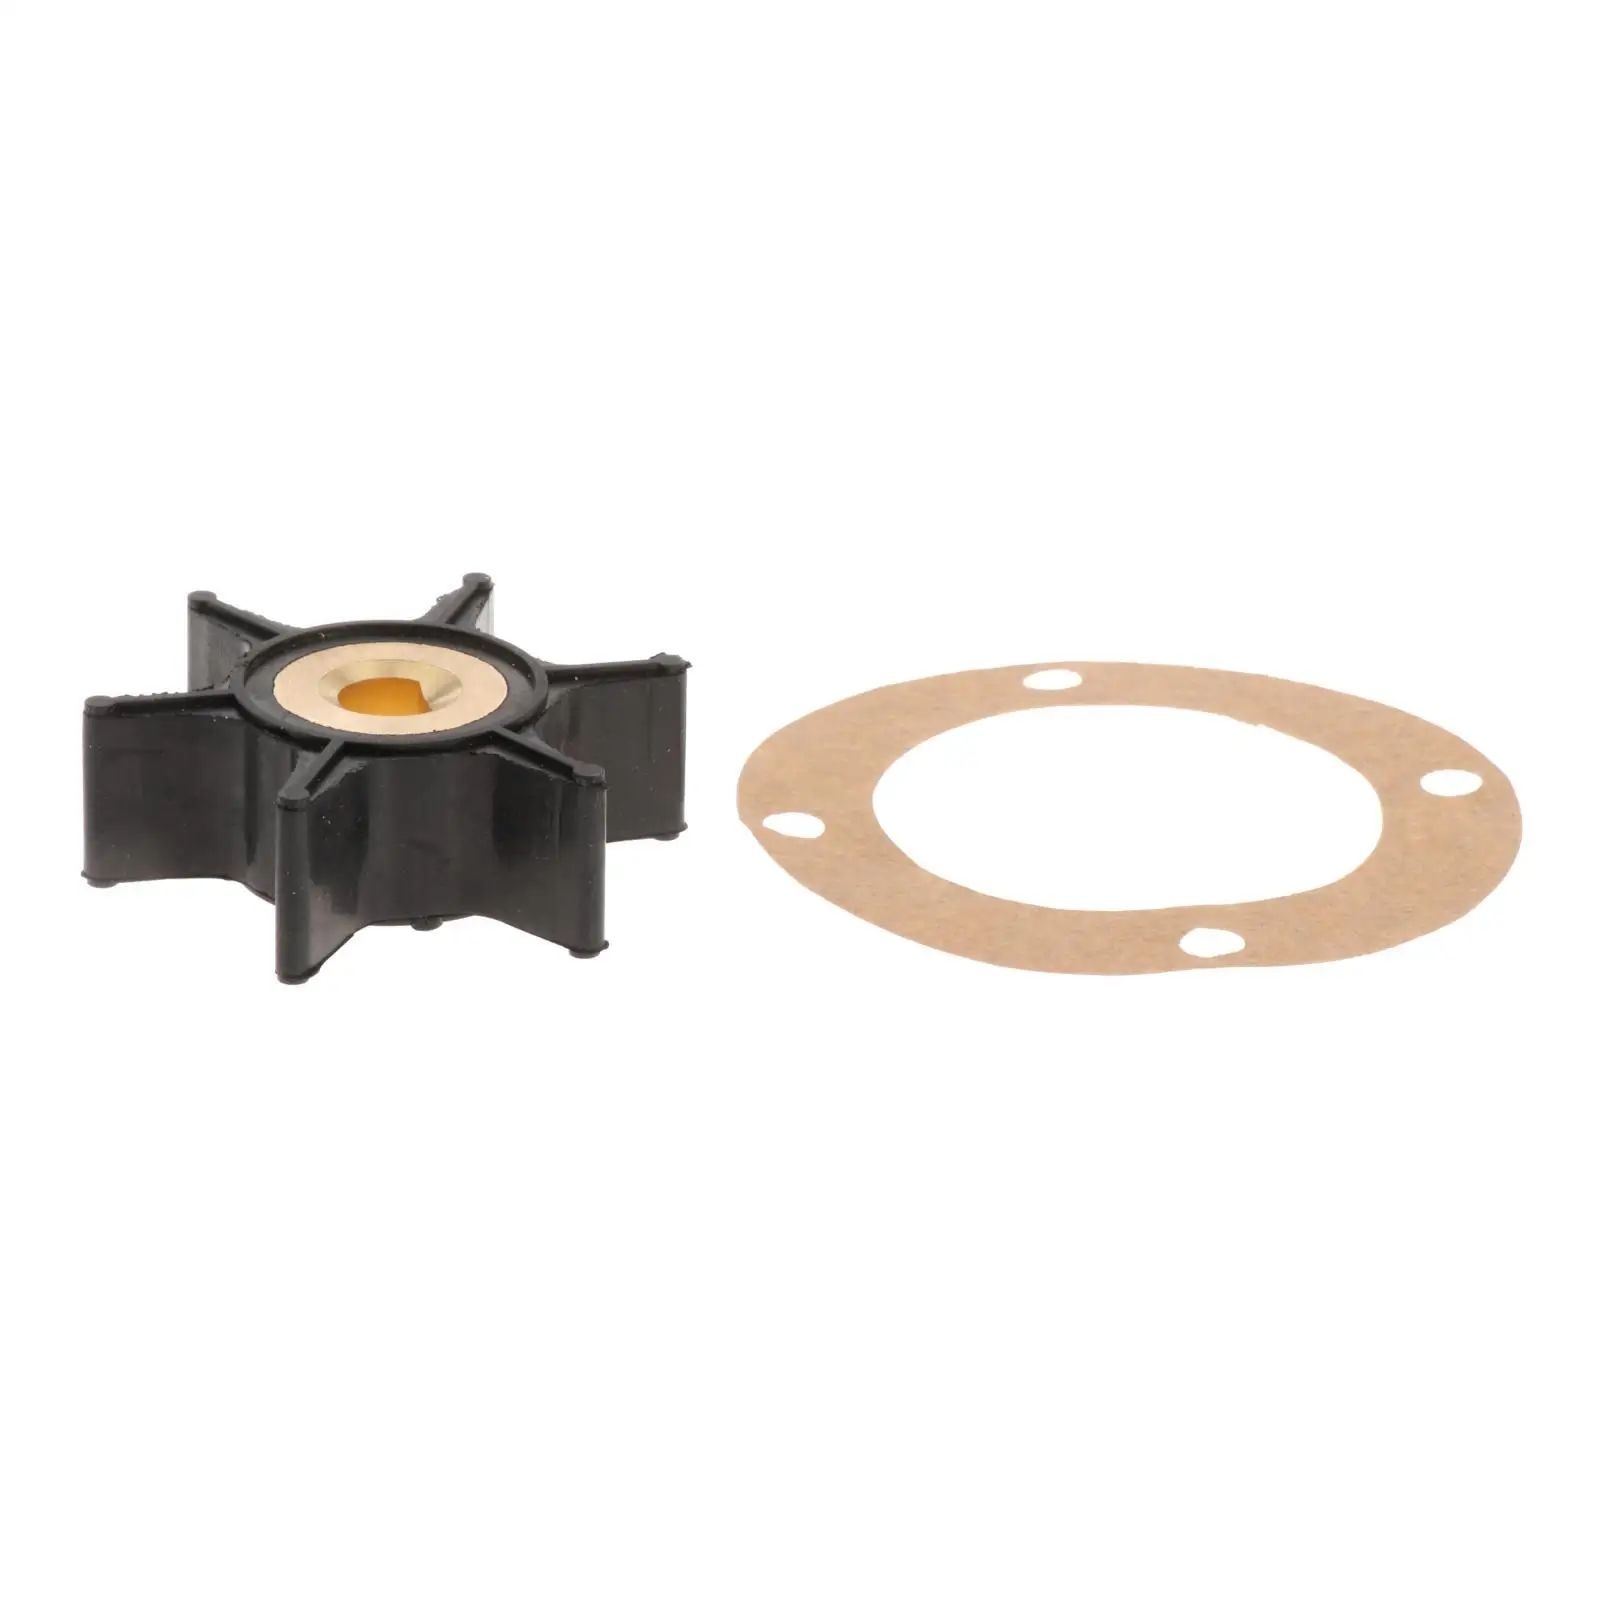 2Pcs Impeller And 4-Hole Gasket for Onan 131-0386 170-3172 131-0257